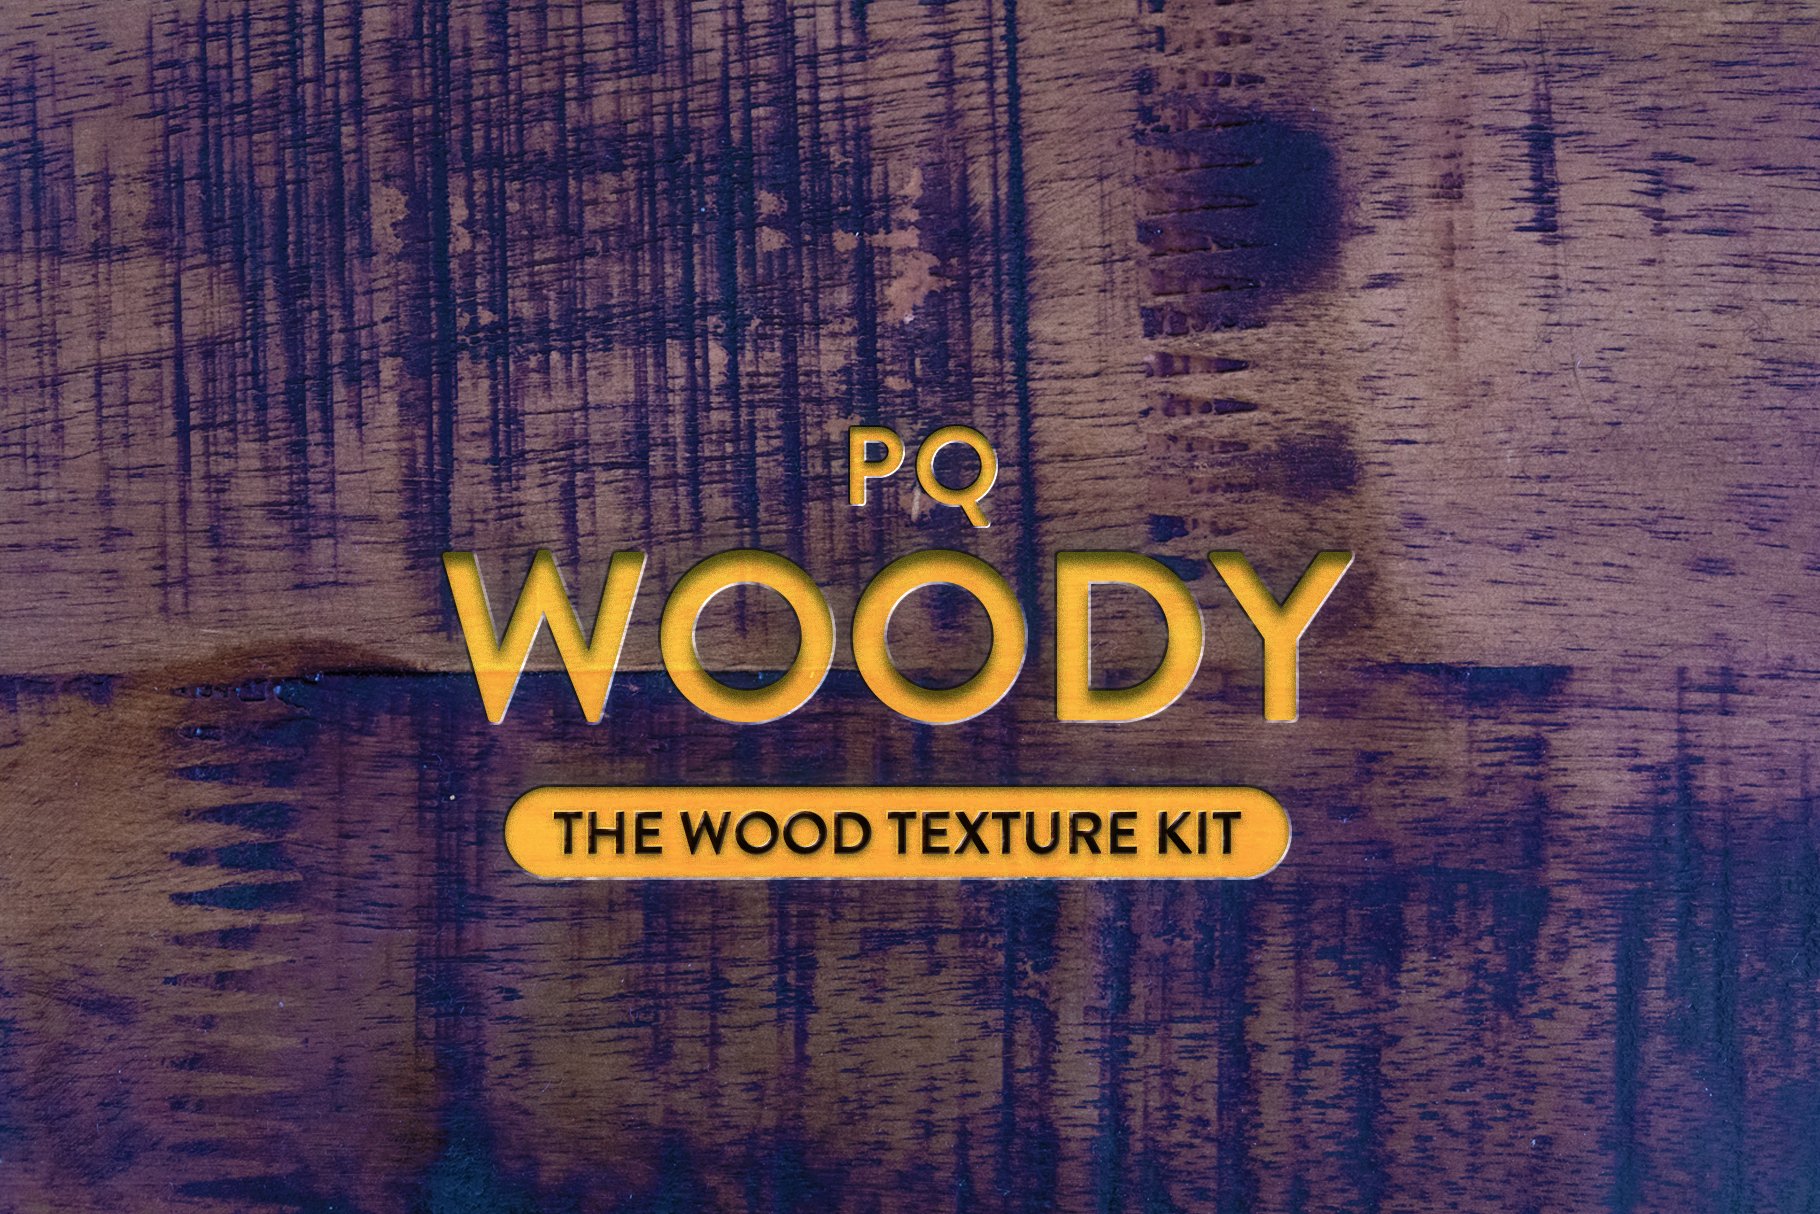 PQ Woody Texture Kit cover image.